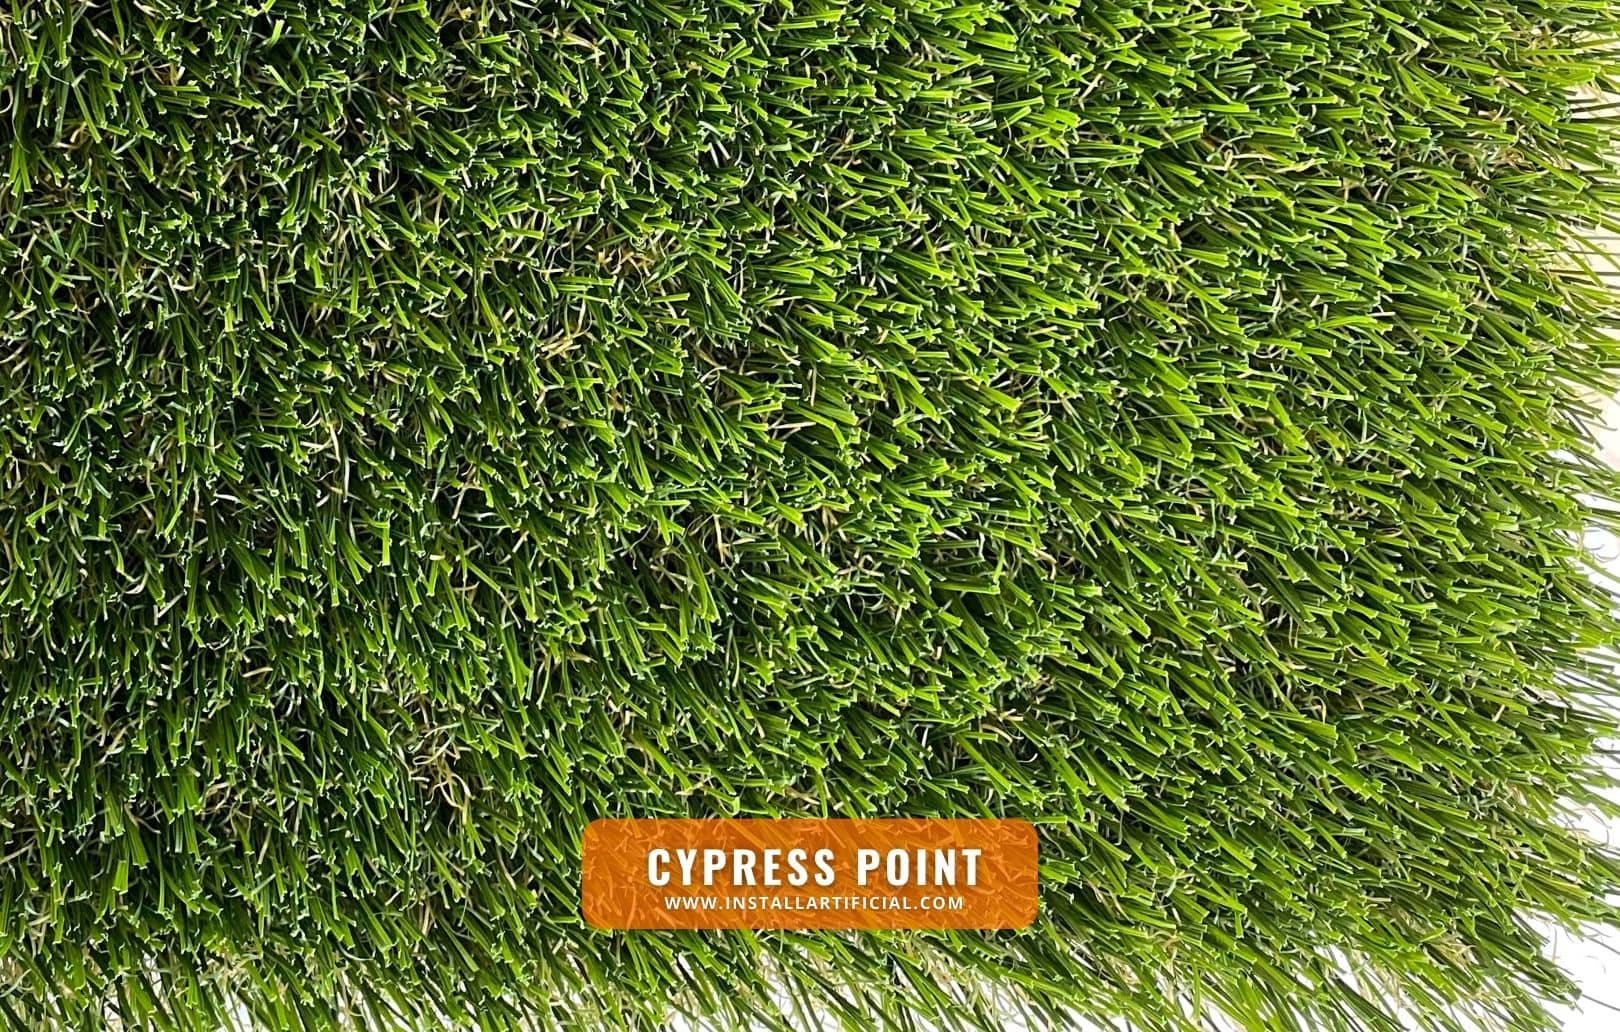 Cypress Point, Smart Turf, top